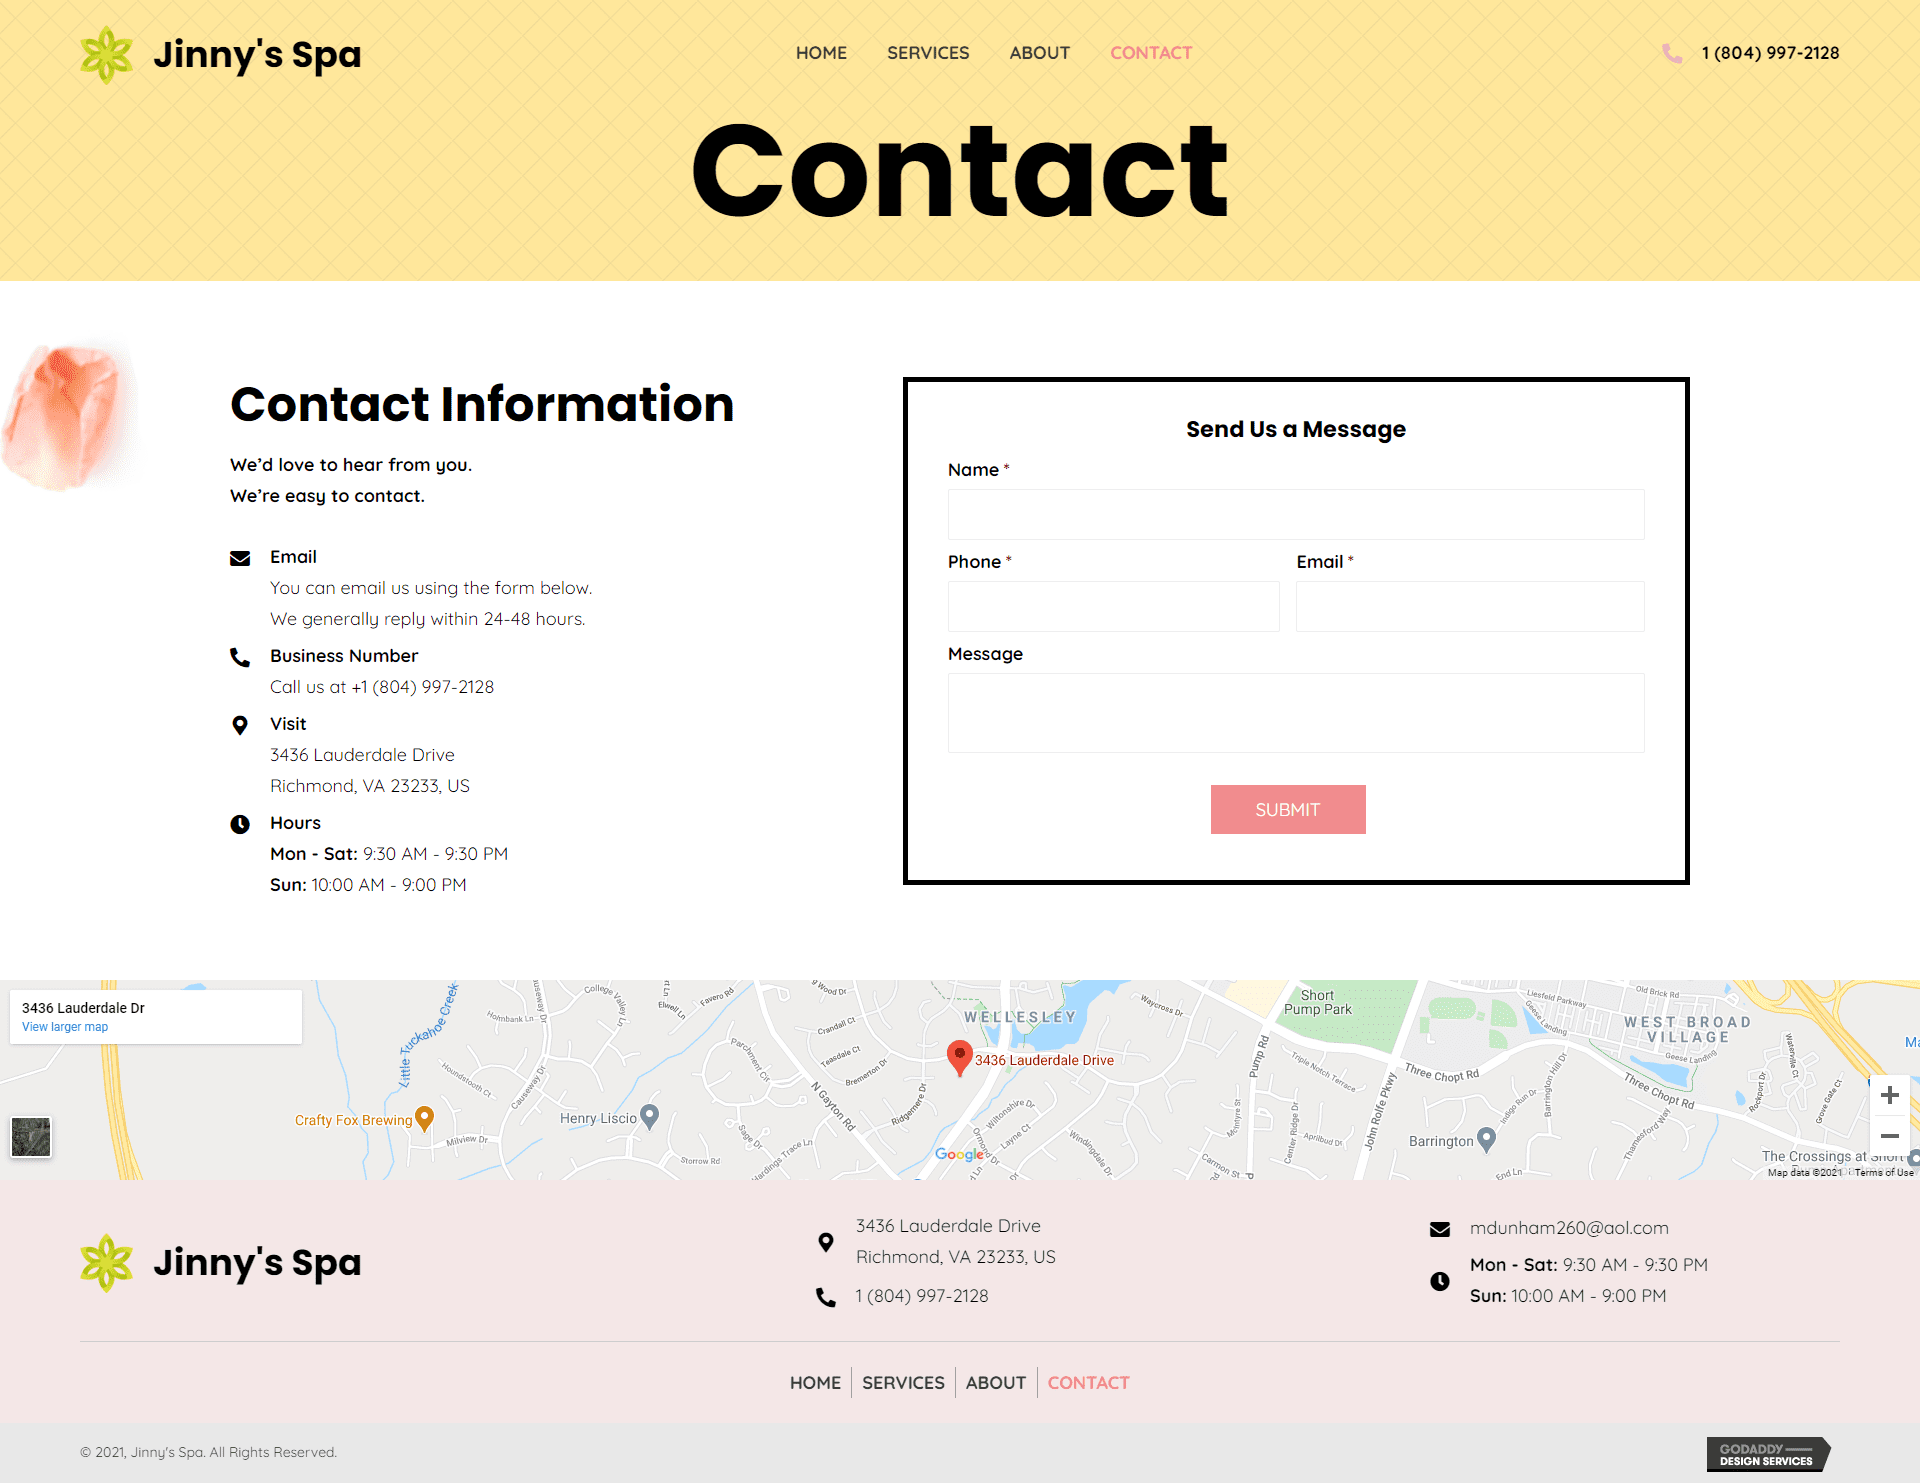 Jinny's Spa Contact page